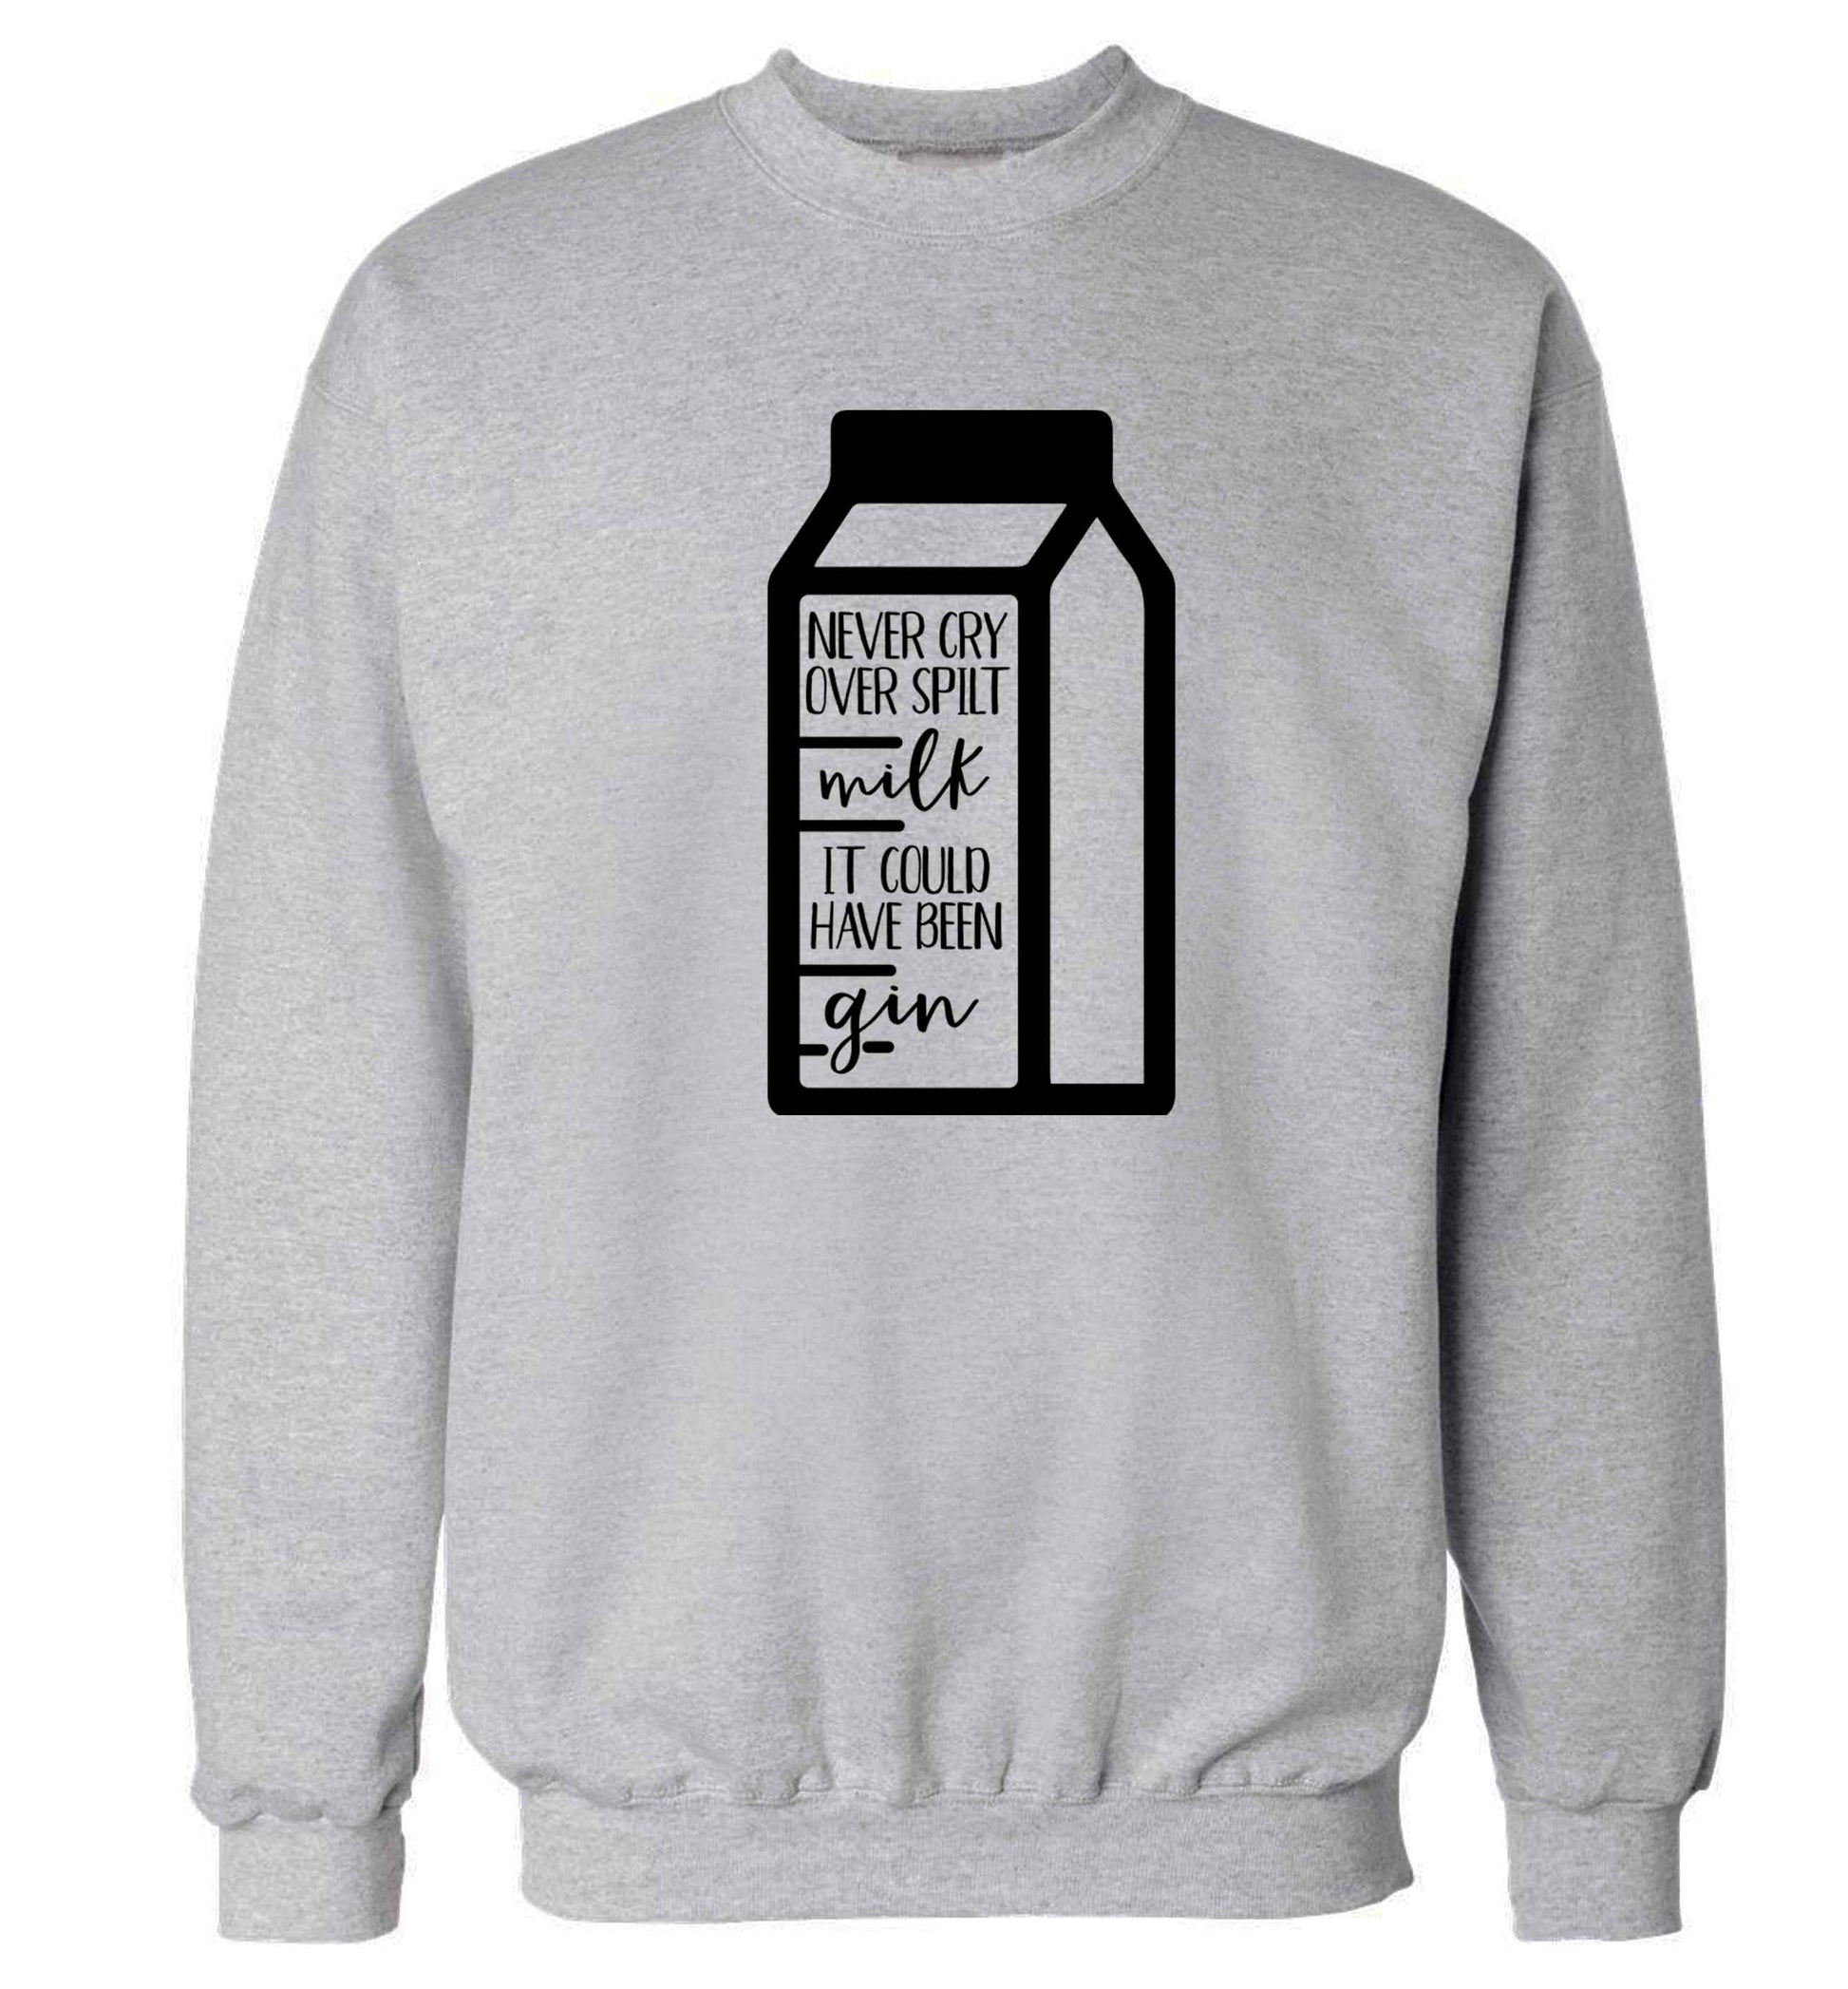 Never cry over spilt milk, it could have been gin Adult's unisex grey Sweater 2XL